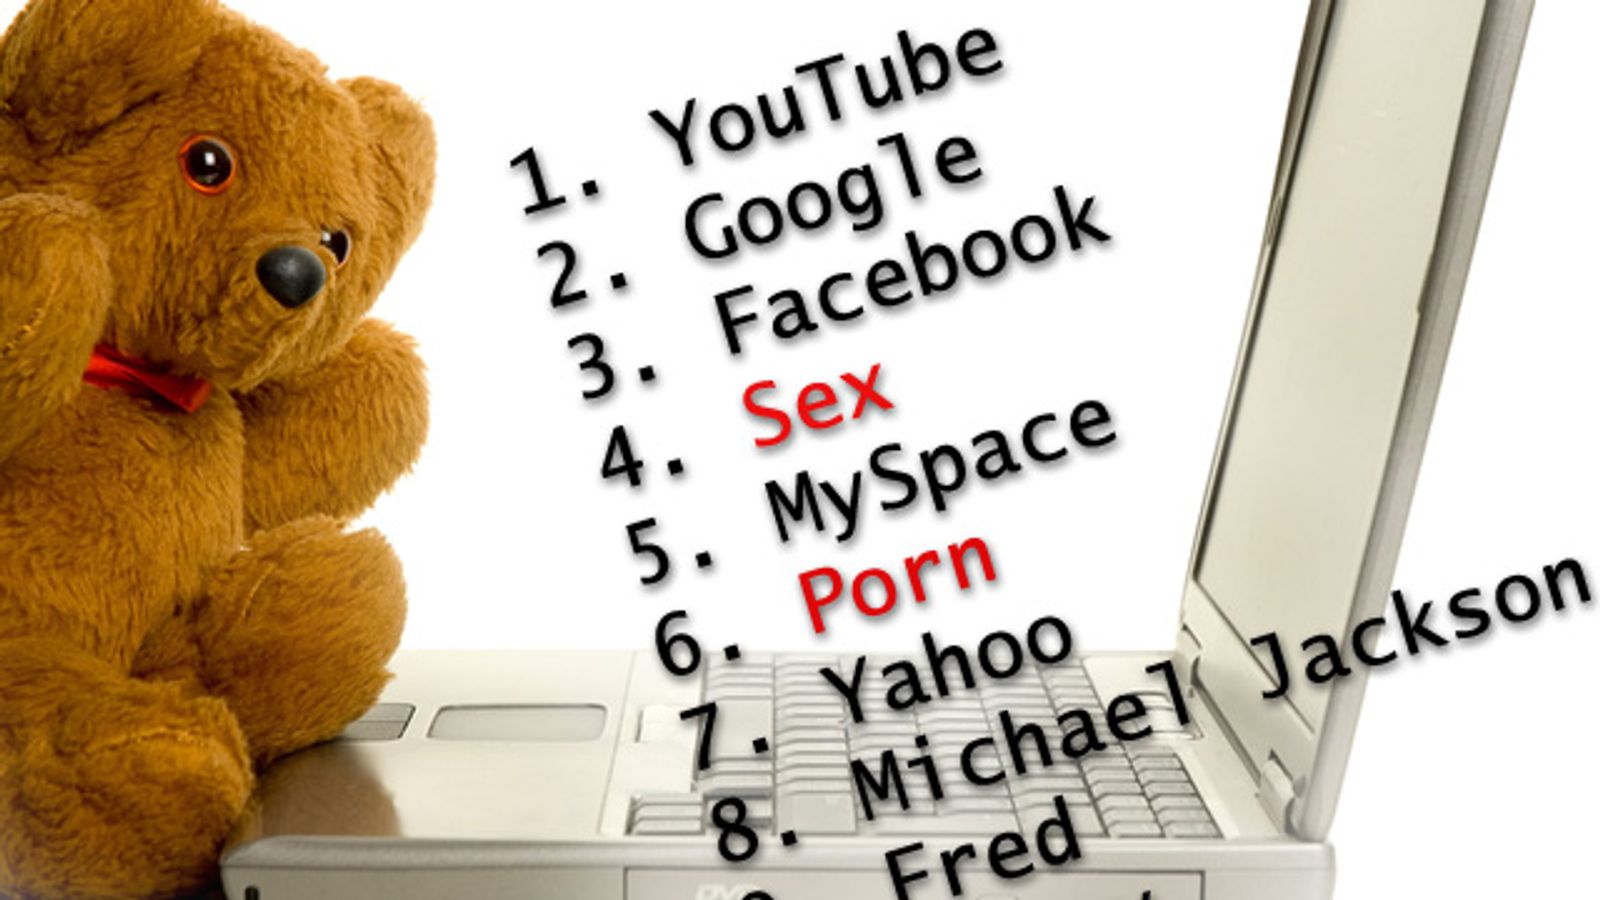 Kids' Top 100 Search Terms for 2009 Include ‘Sex,’ ‘Porn’